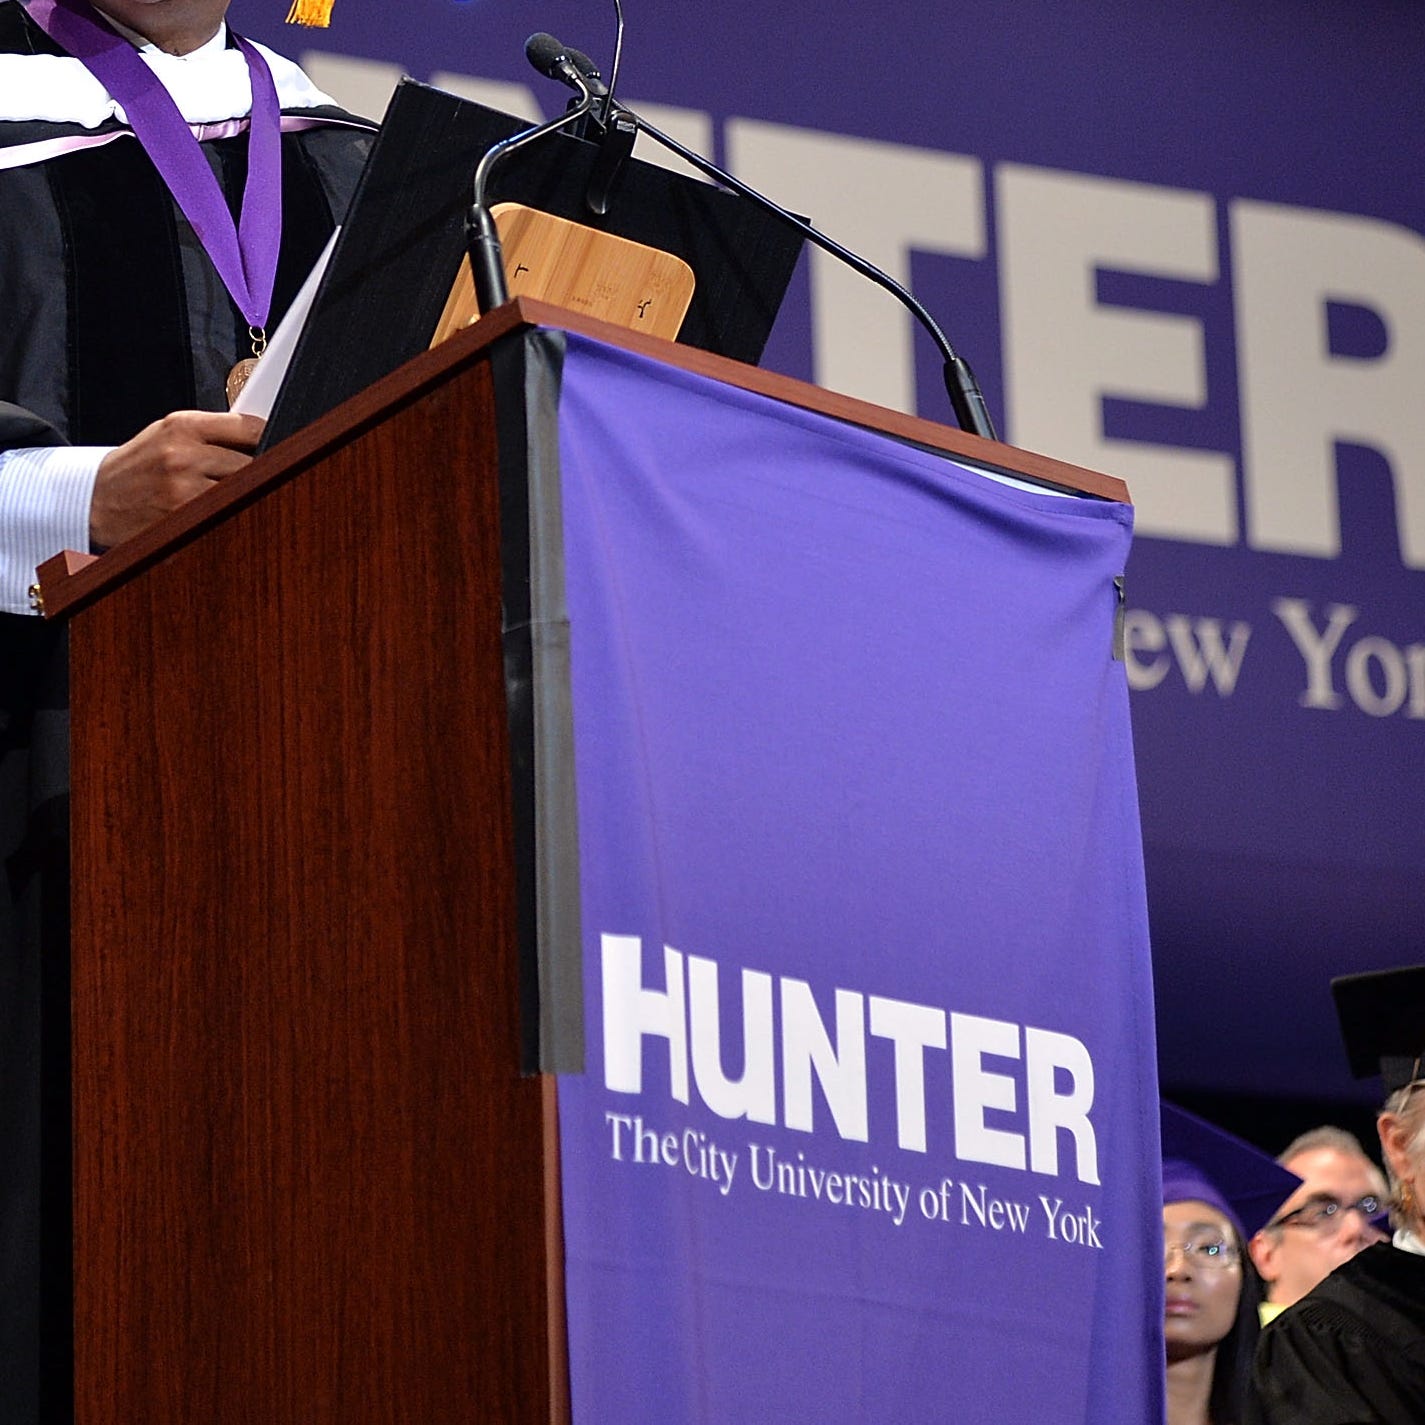 Jazz musician Wynton Marsalis attends the Hunter College Spring 2014 Commencement at Radio City Music Hall on May 27, 2014 in New York City.